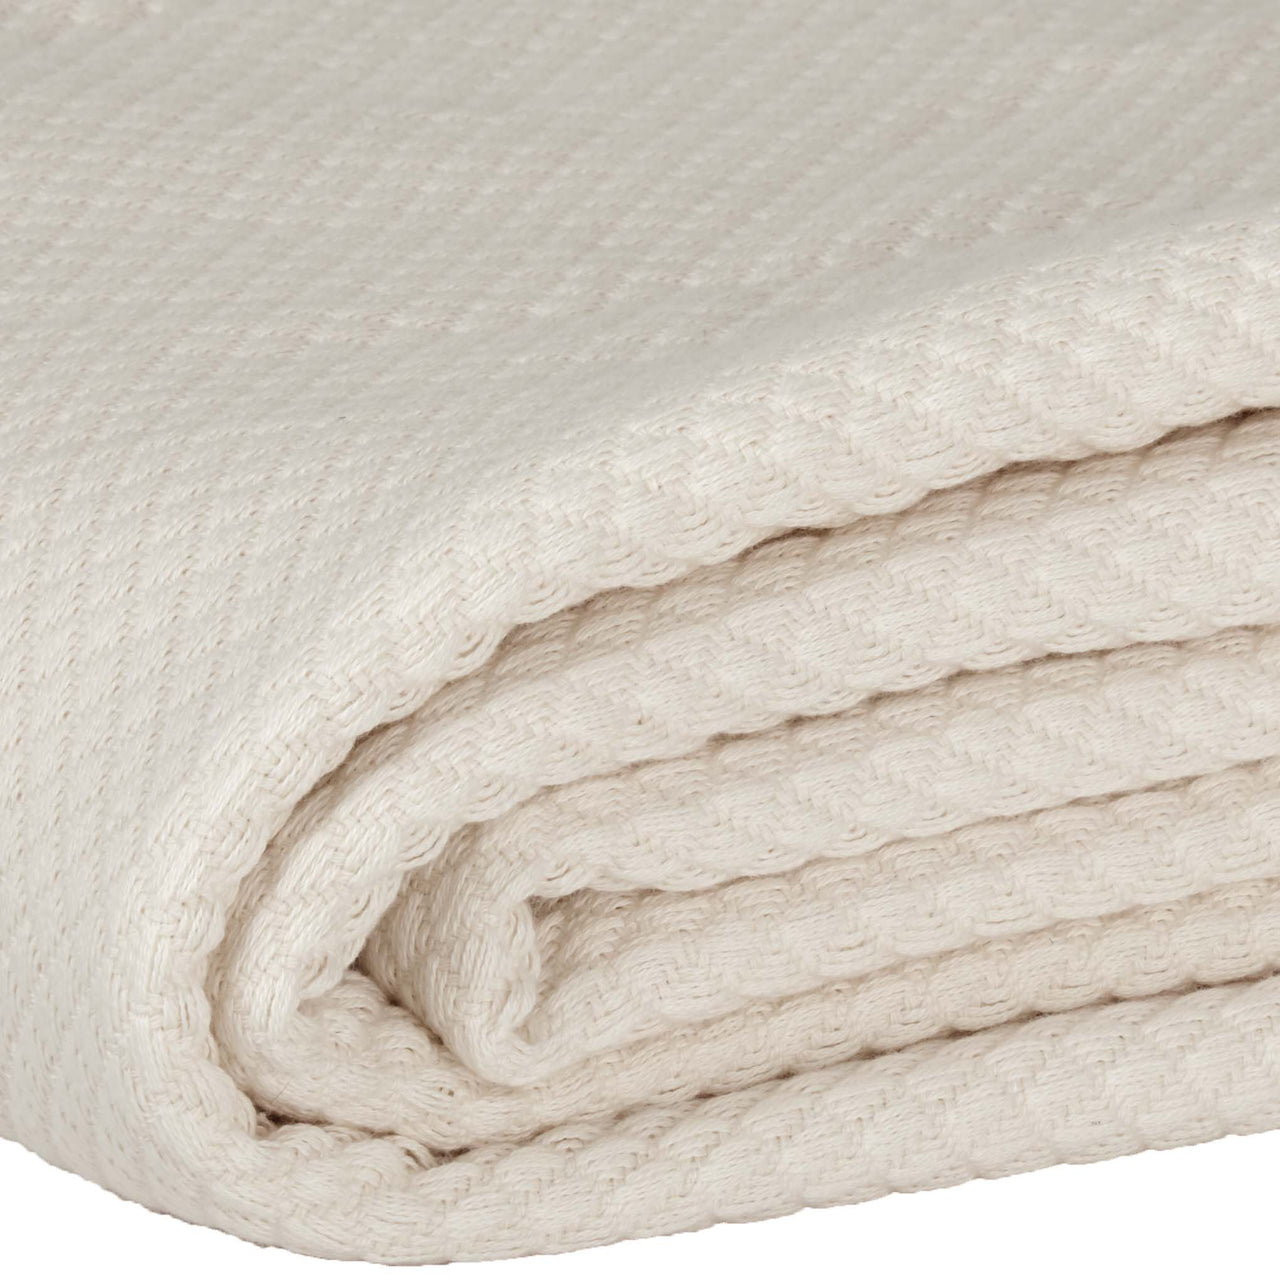 Serenity Creme Twin Cotton Woven Blanket 90"x62" VHC Brands